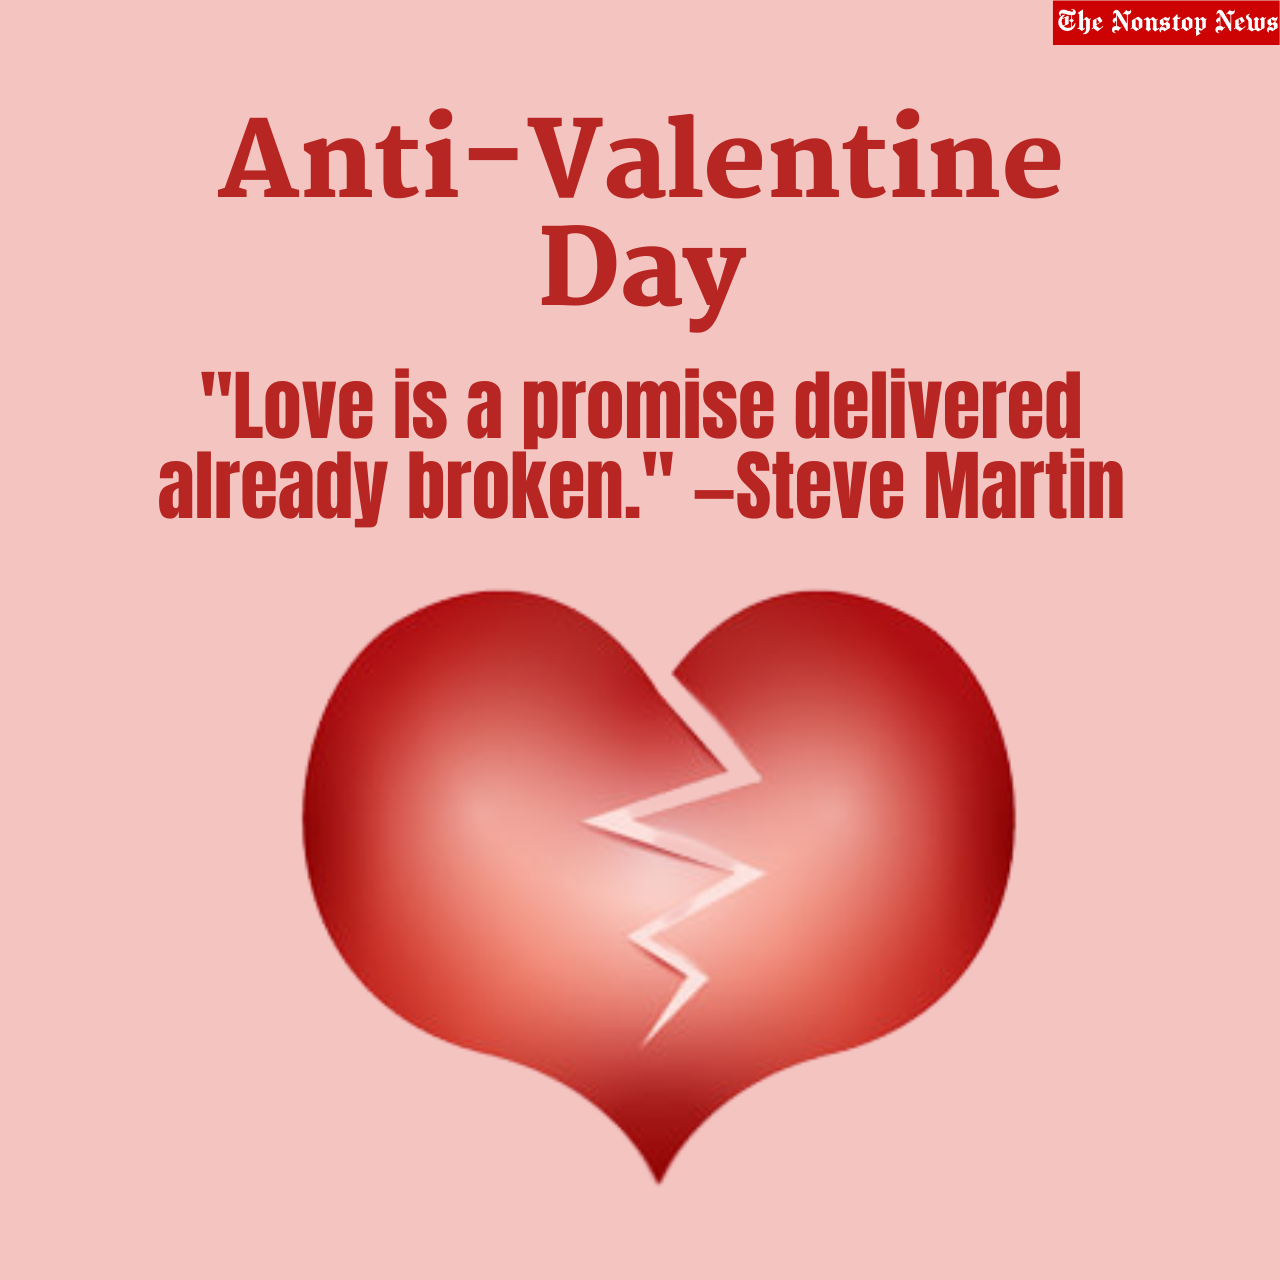 Happy Anti-Valentine's Day 2023 Memes, Quotes, Wishes, Images, Sayings, Messages, Greetings, Jokes, Captions, Cliparts